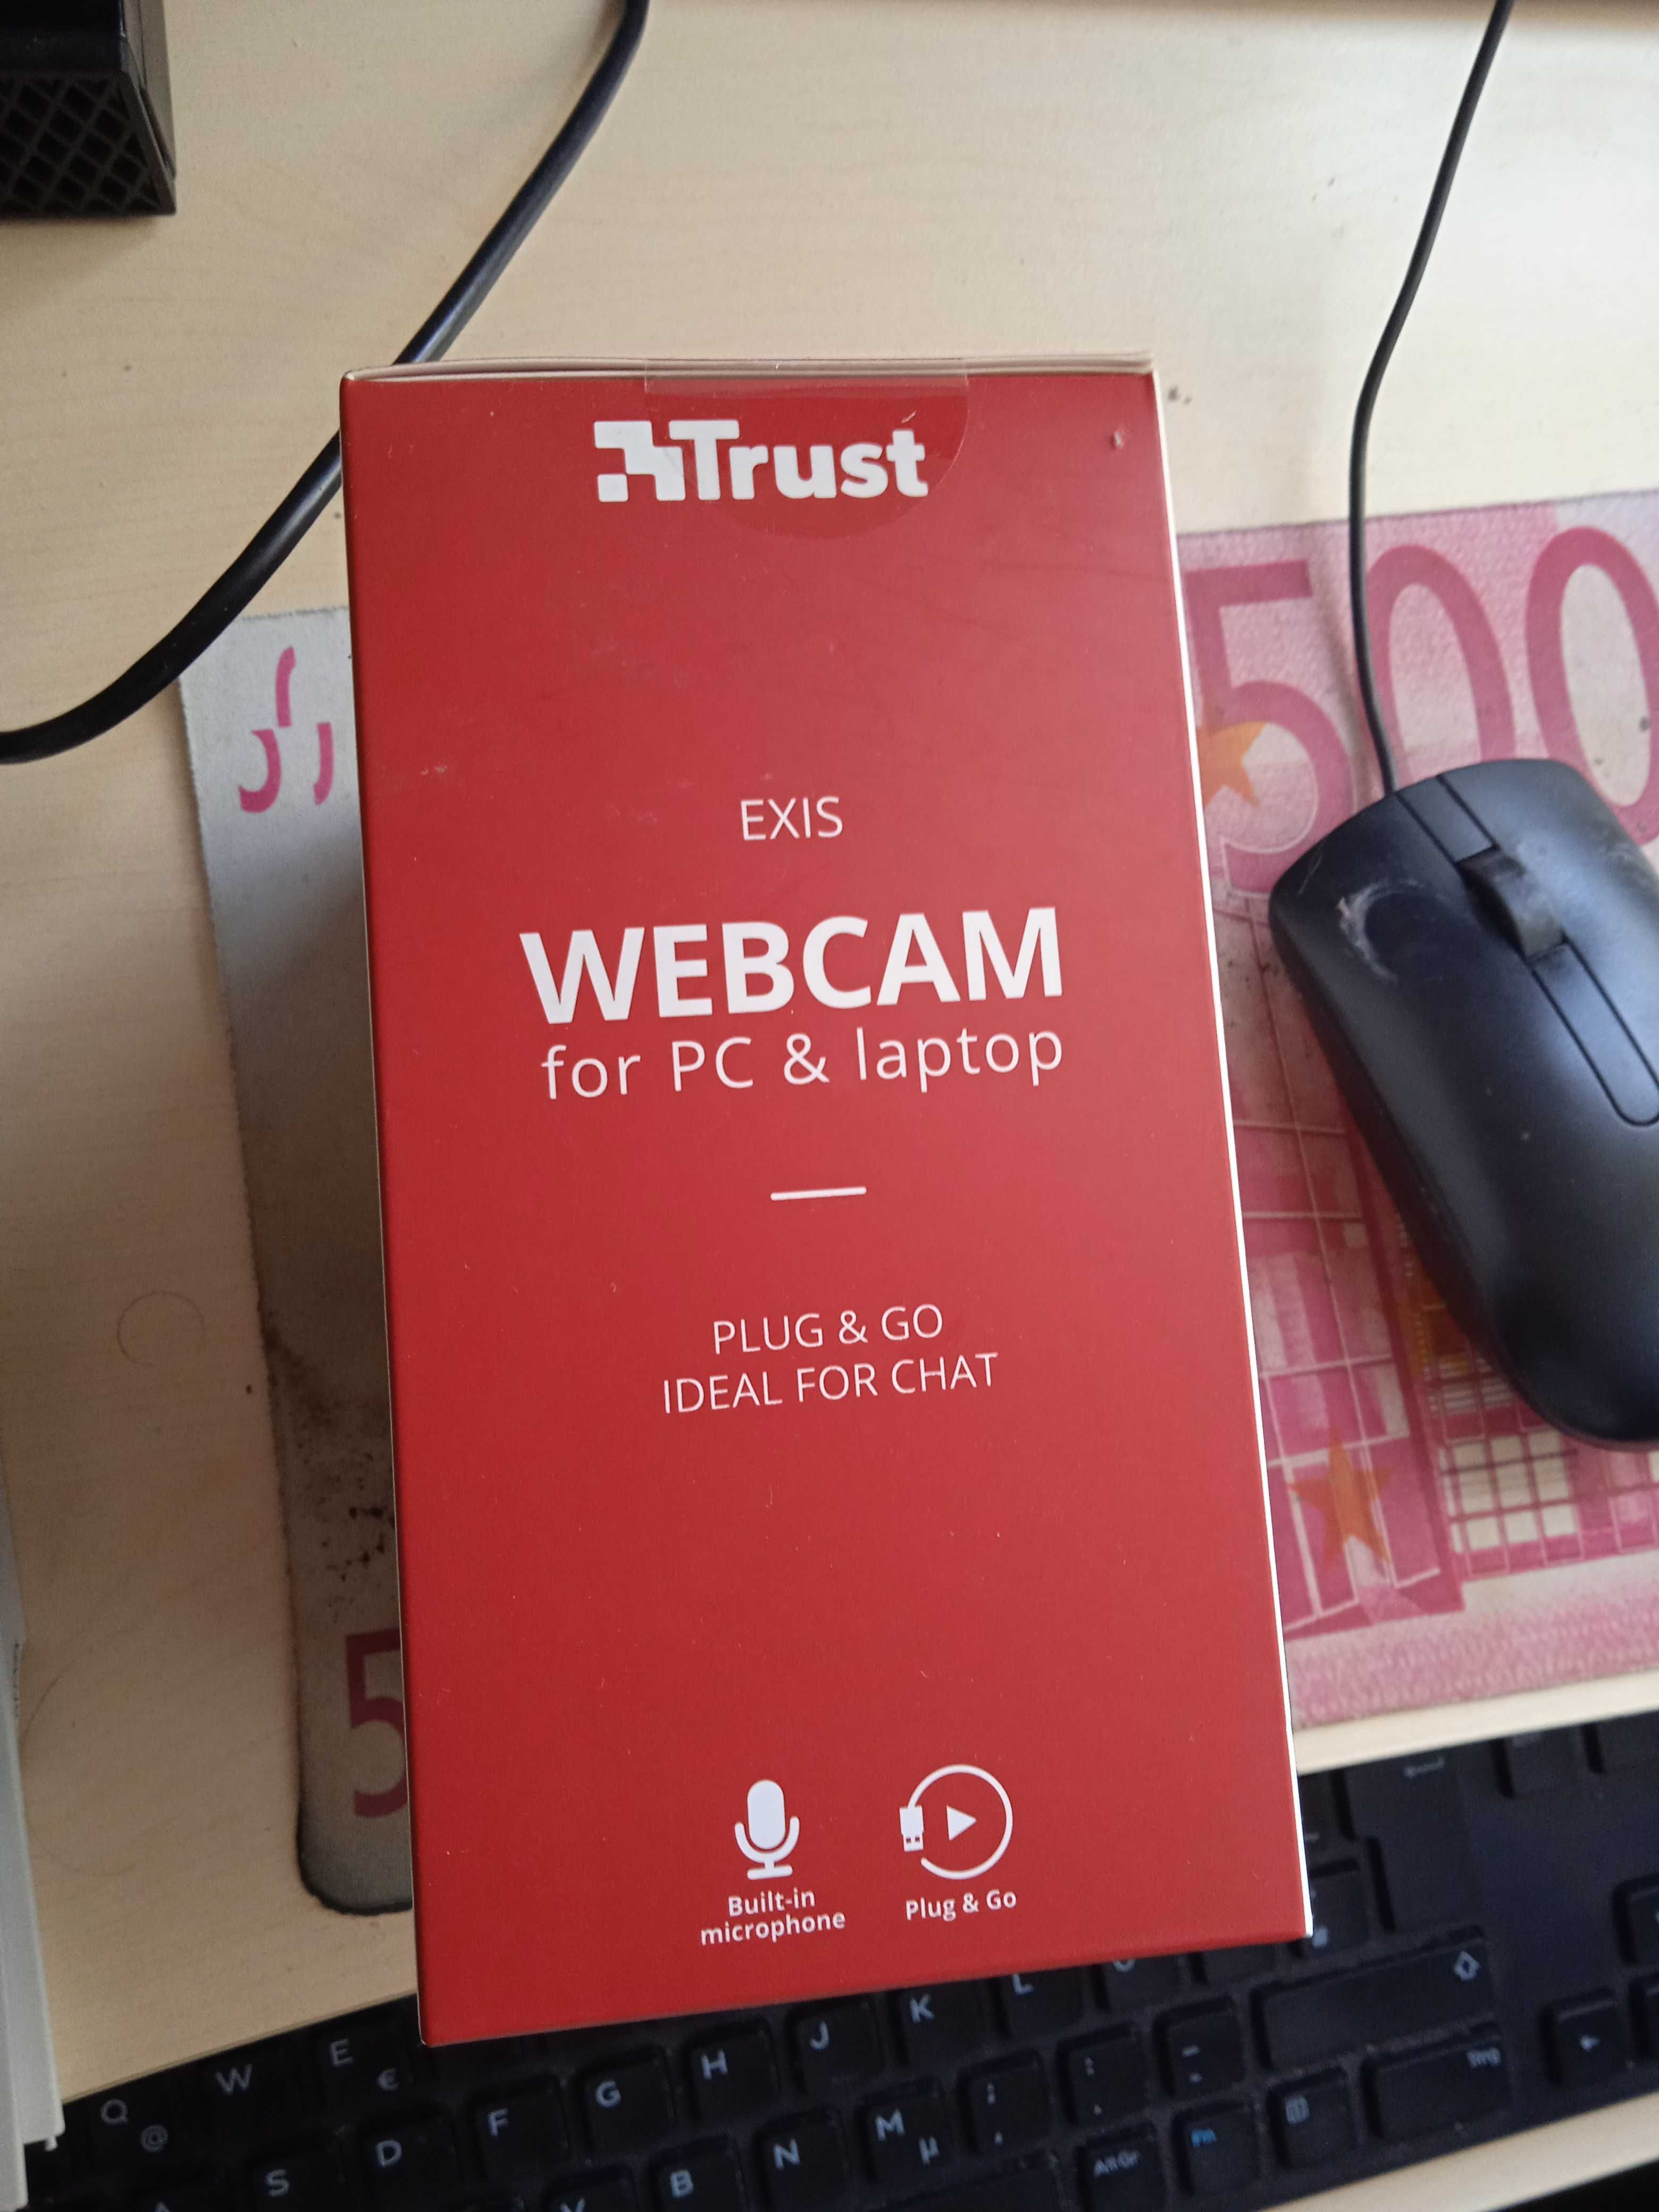 Trust webcam for PC and laptop